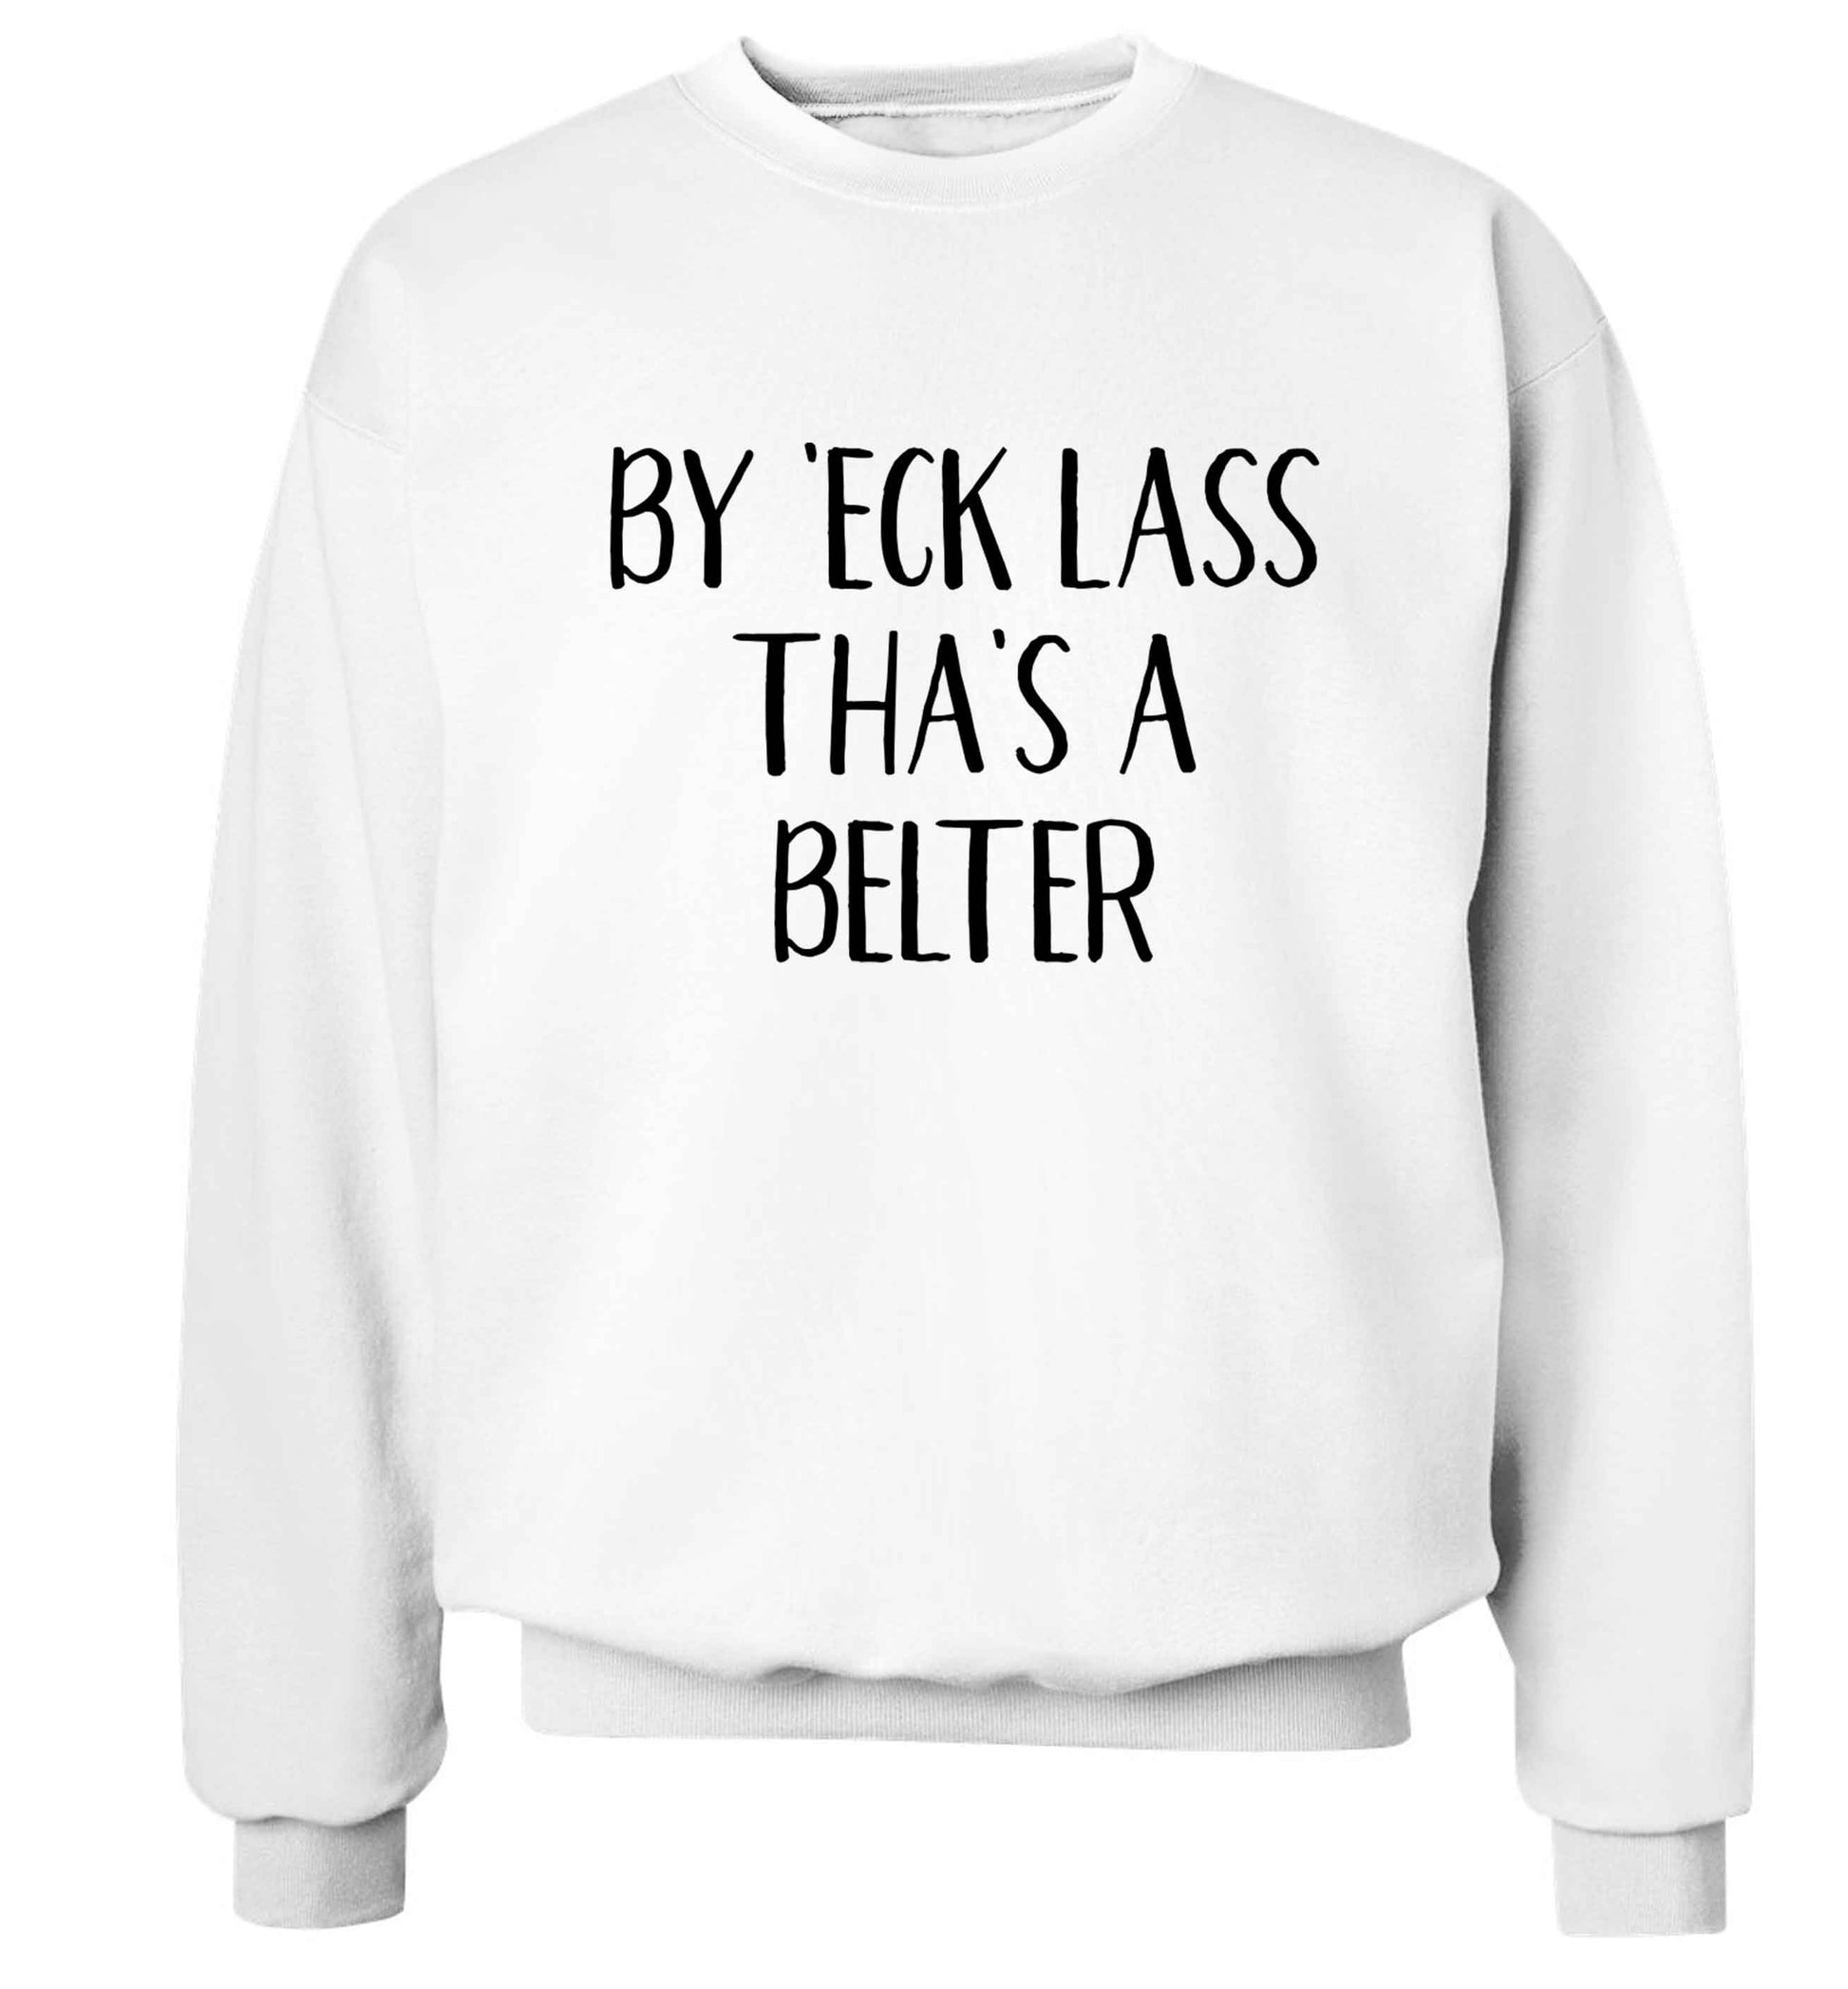 Be 'eck lass tha's a belter Adult's unisex white Sweater 2XL